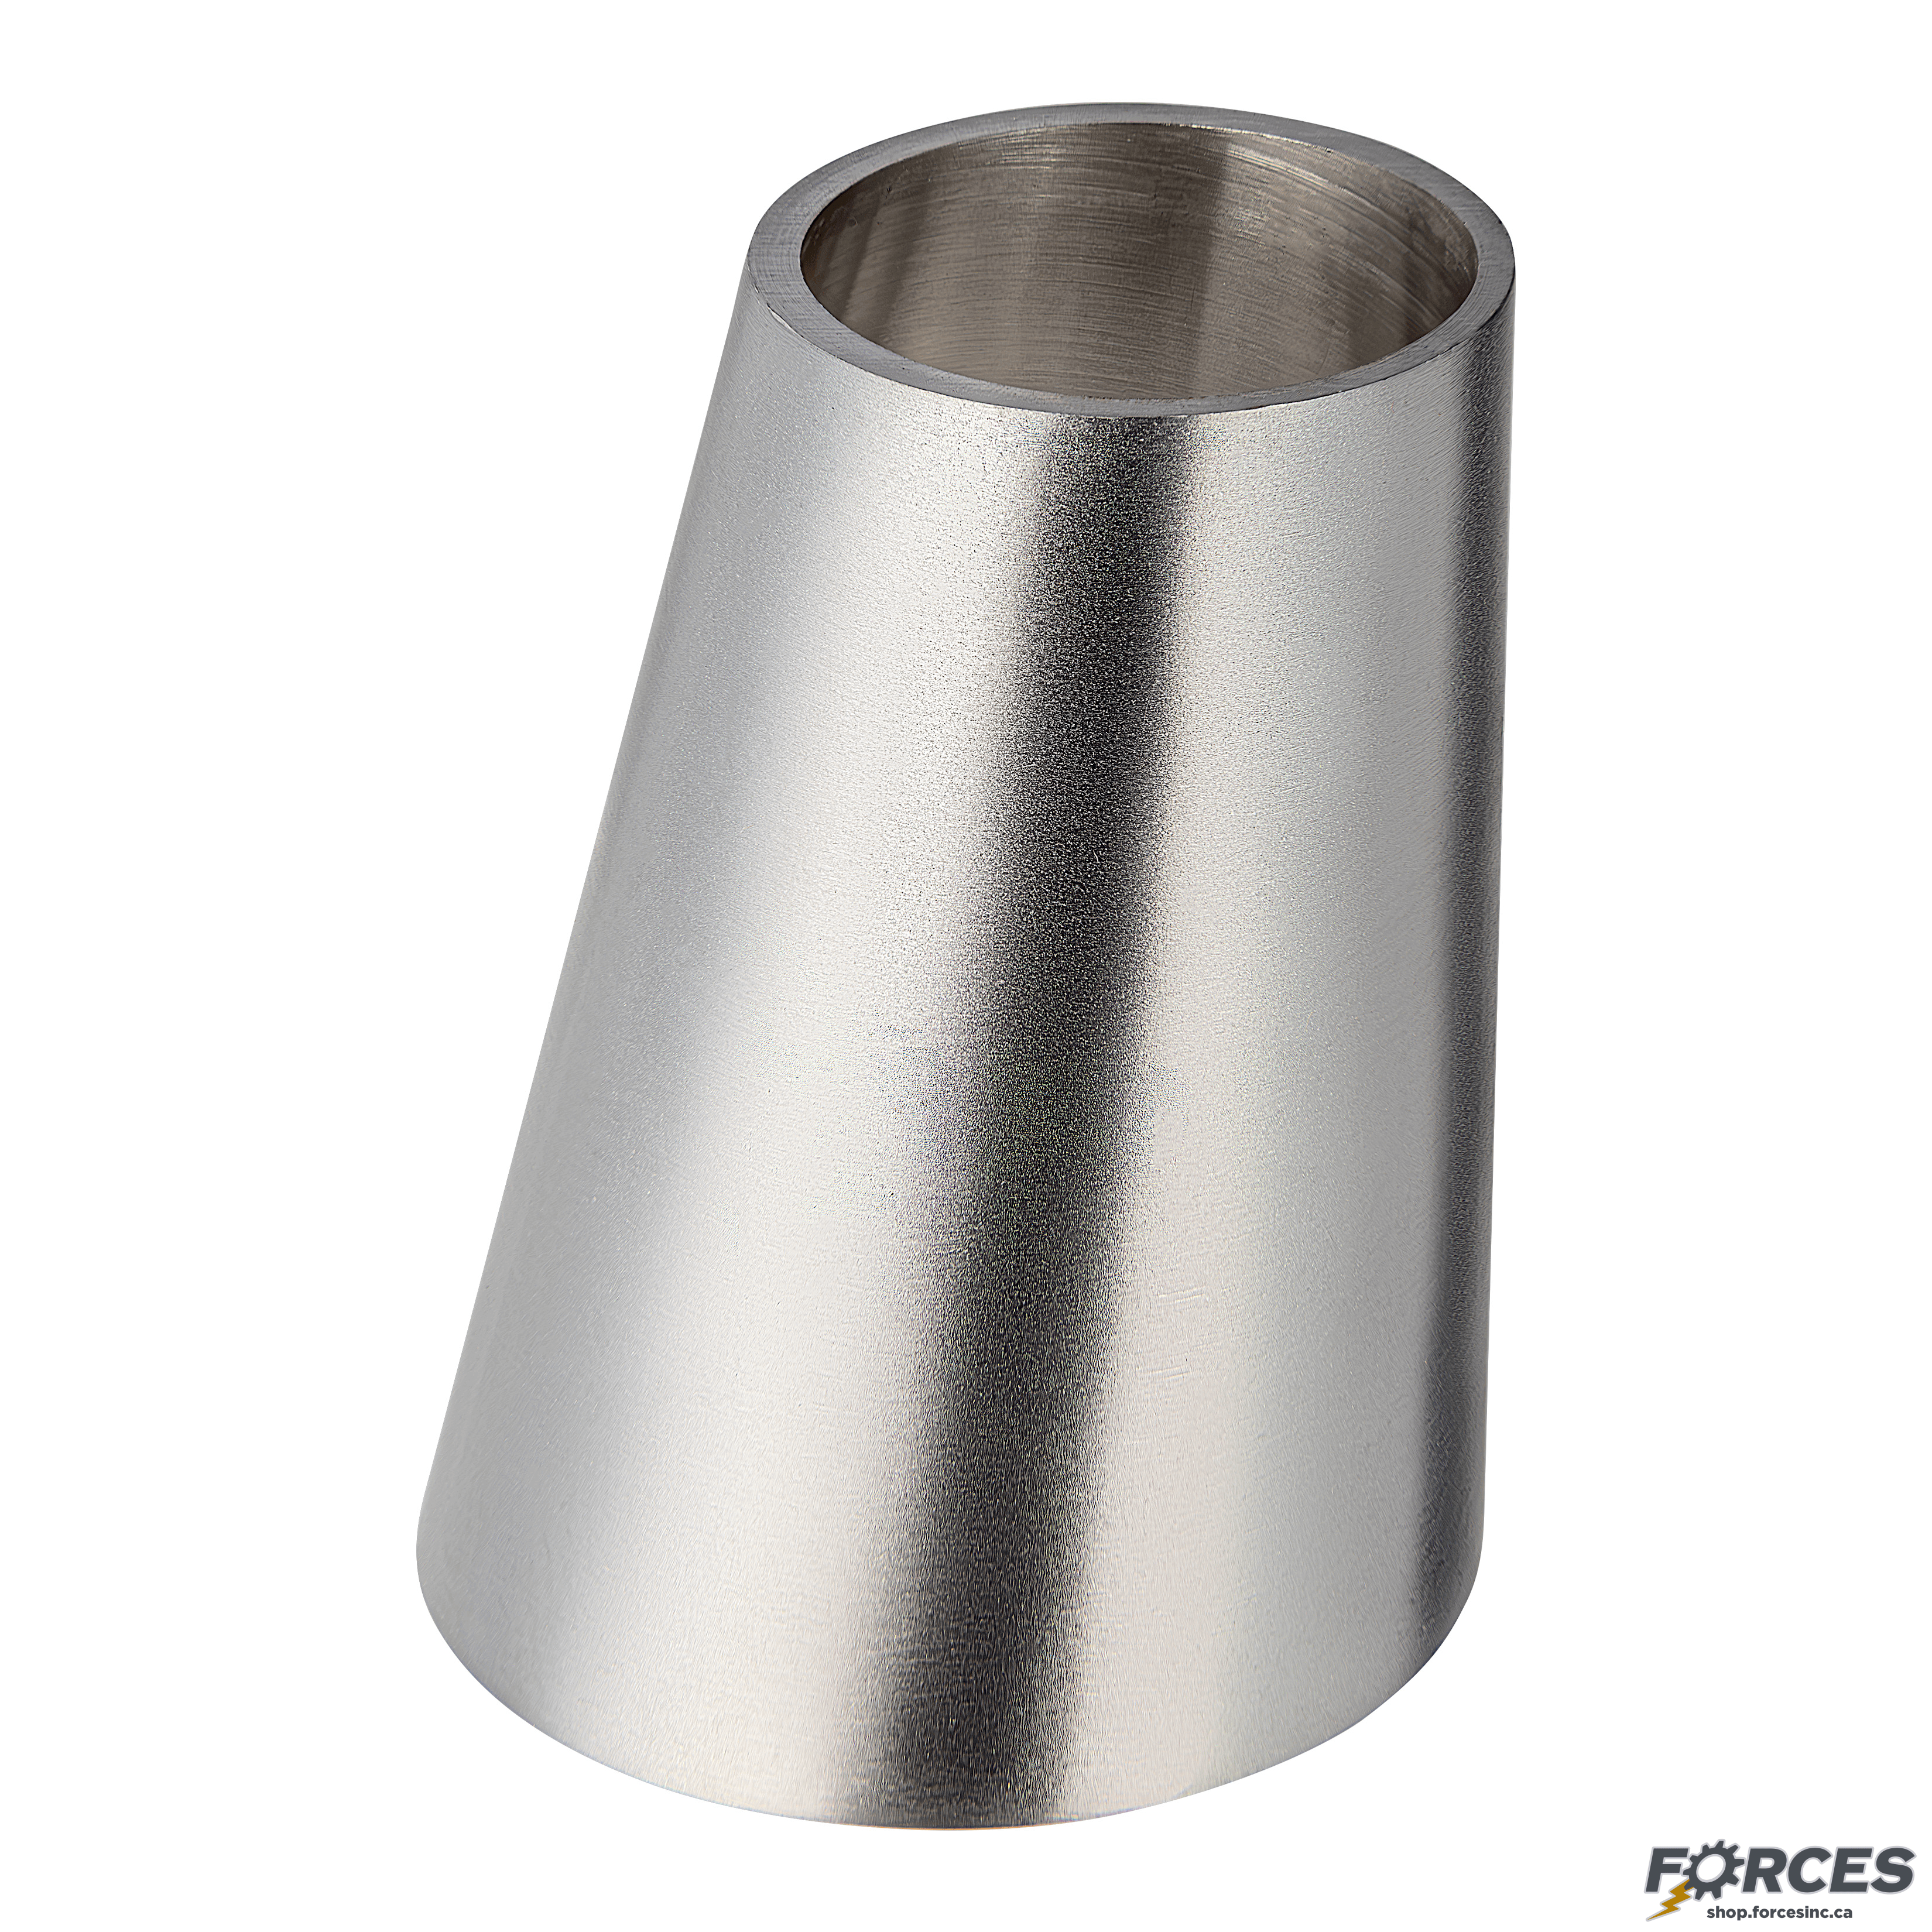 2" x 1-1/2" Butt Weld Eccentric Reducer - Stainless Steel 316 - Forces Inc